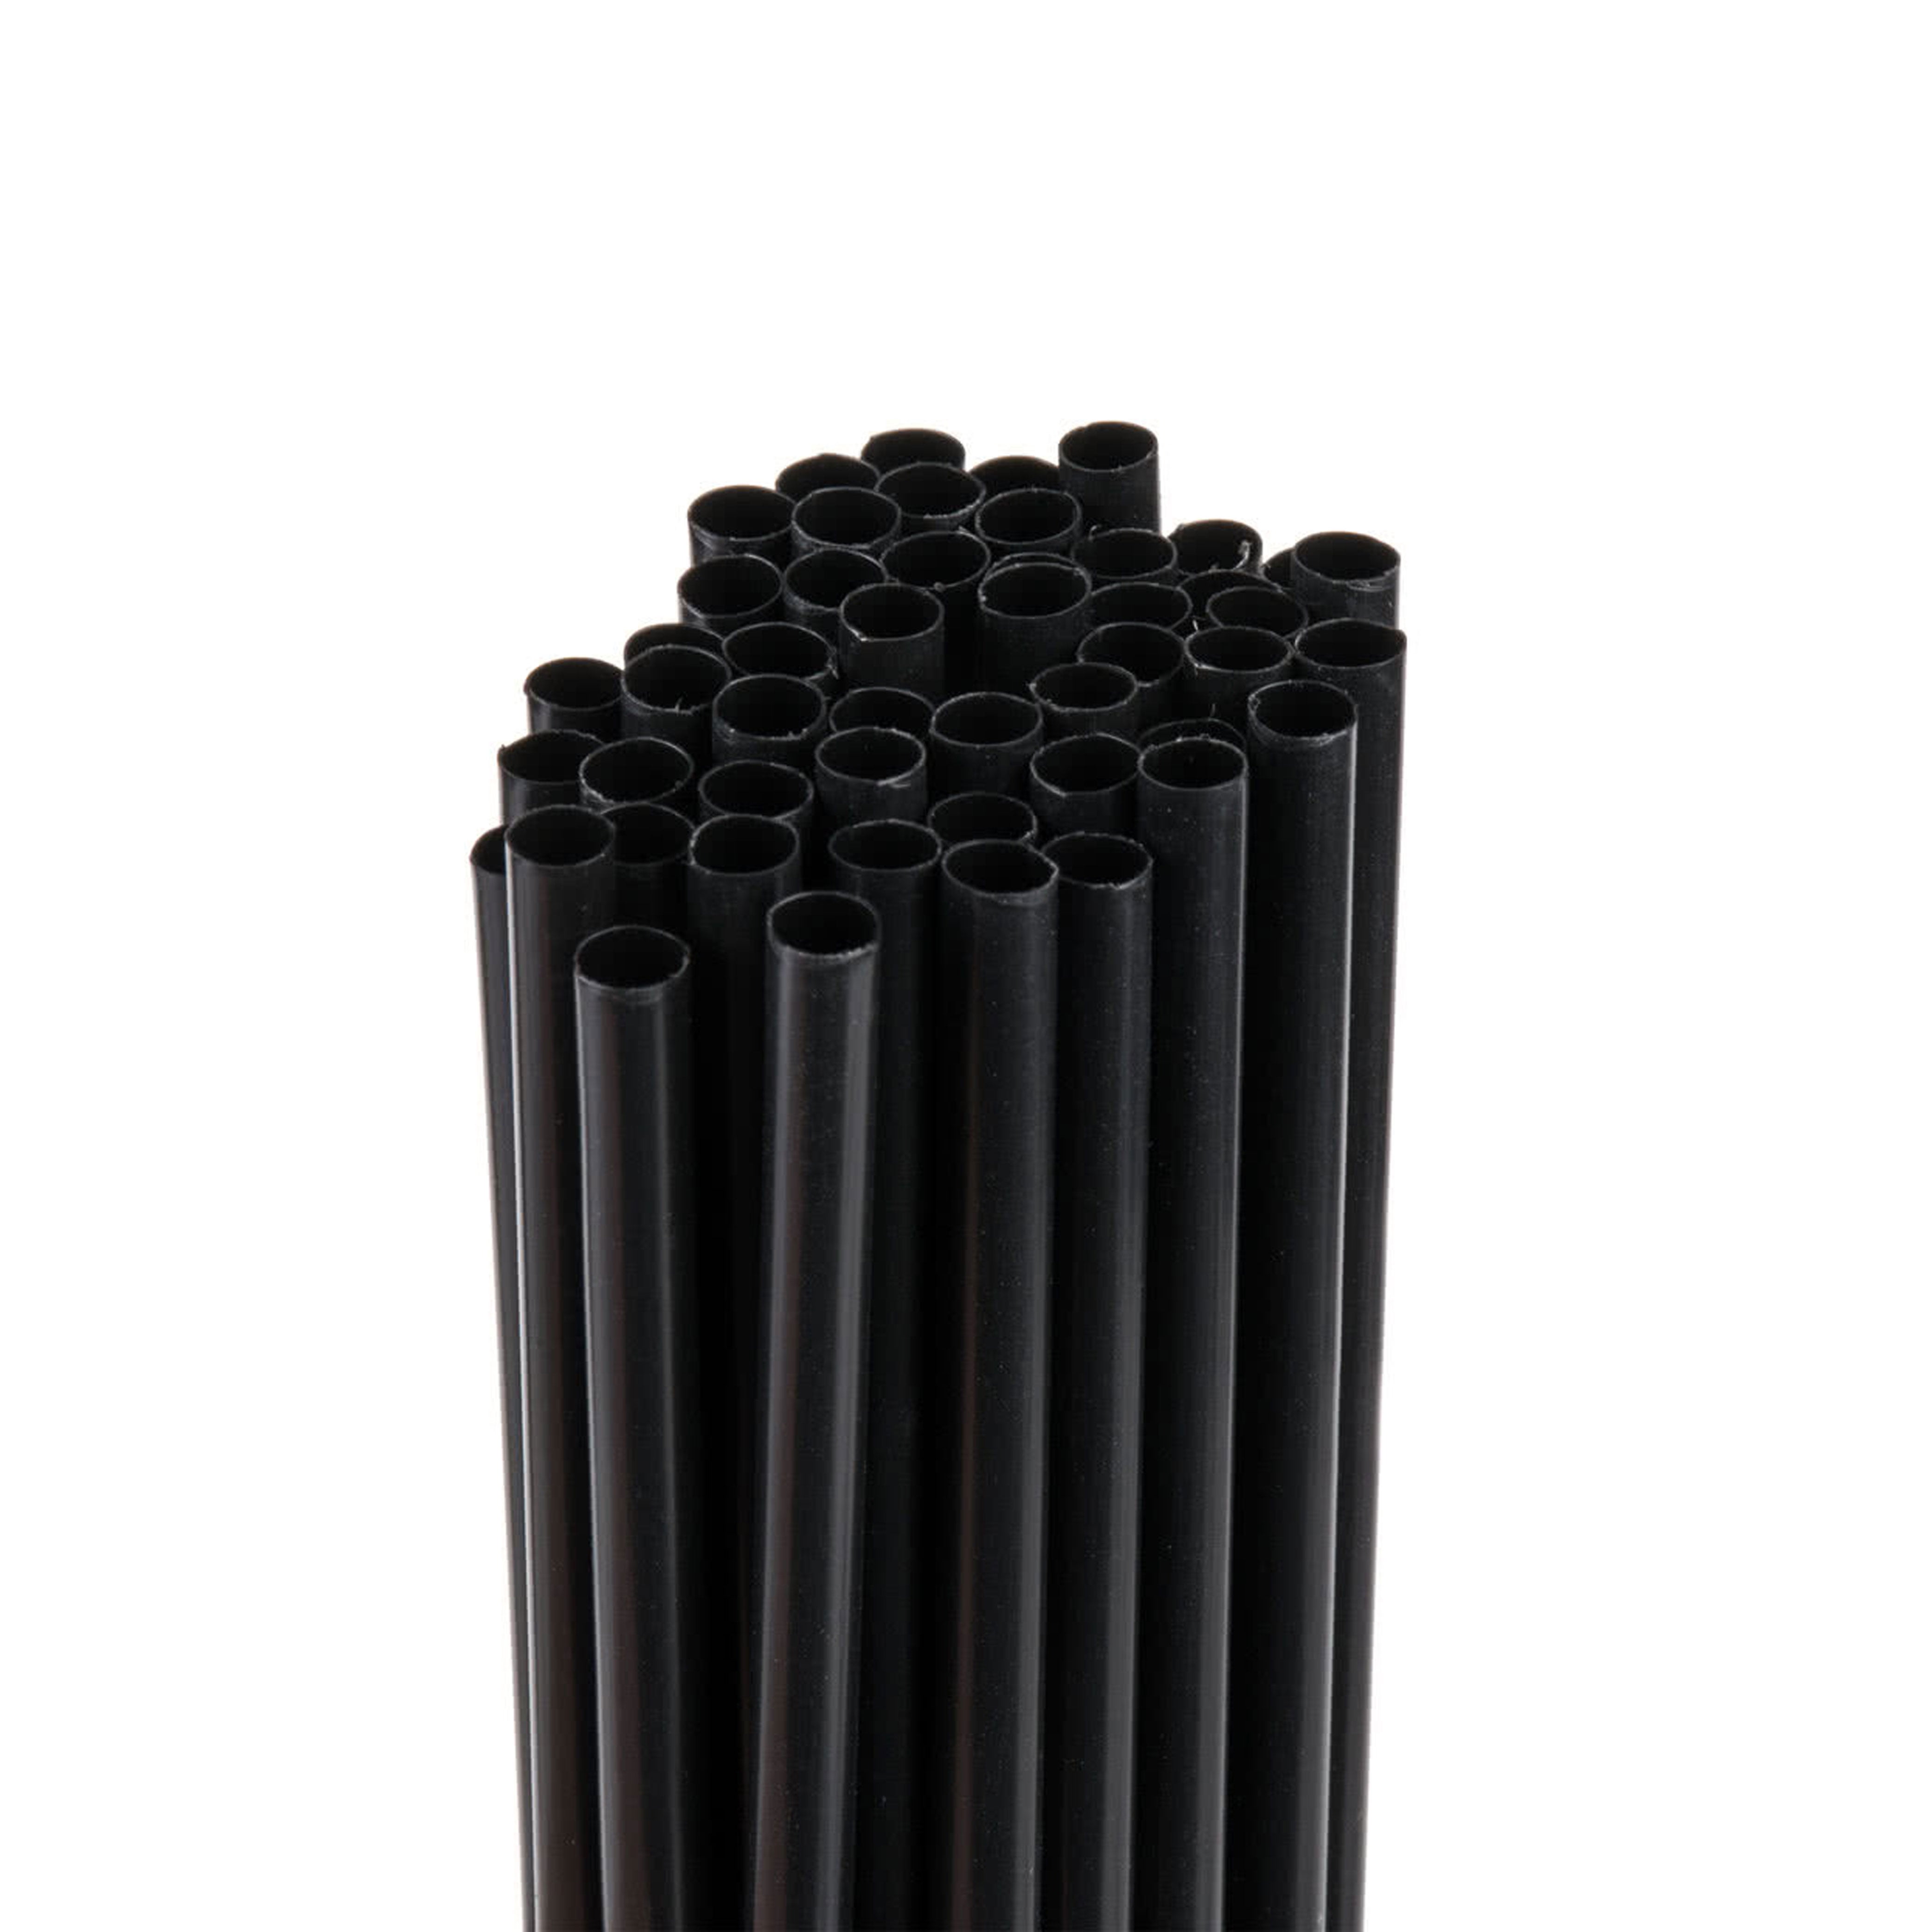 Coffee 8-Inches Plastic Stirrers Latte and Tea Black Sip Stirrers by Tezzorio Disposable Stirrer Straws For Cocktail Pack of 1000 